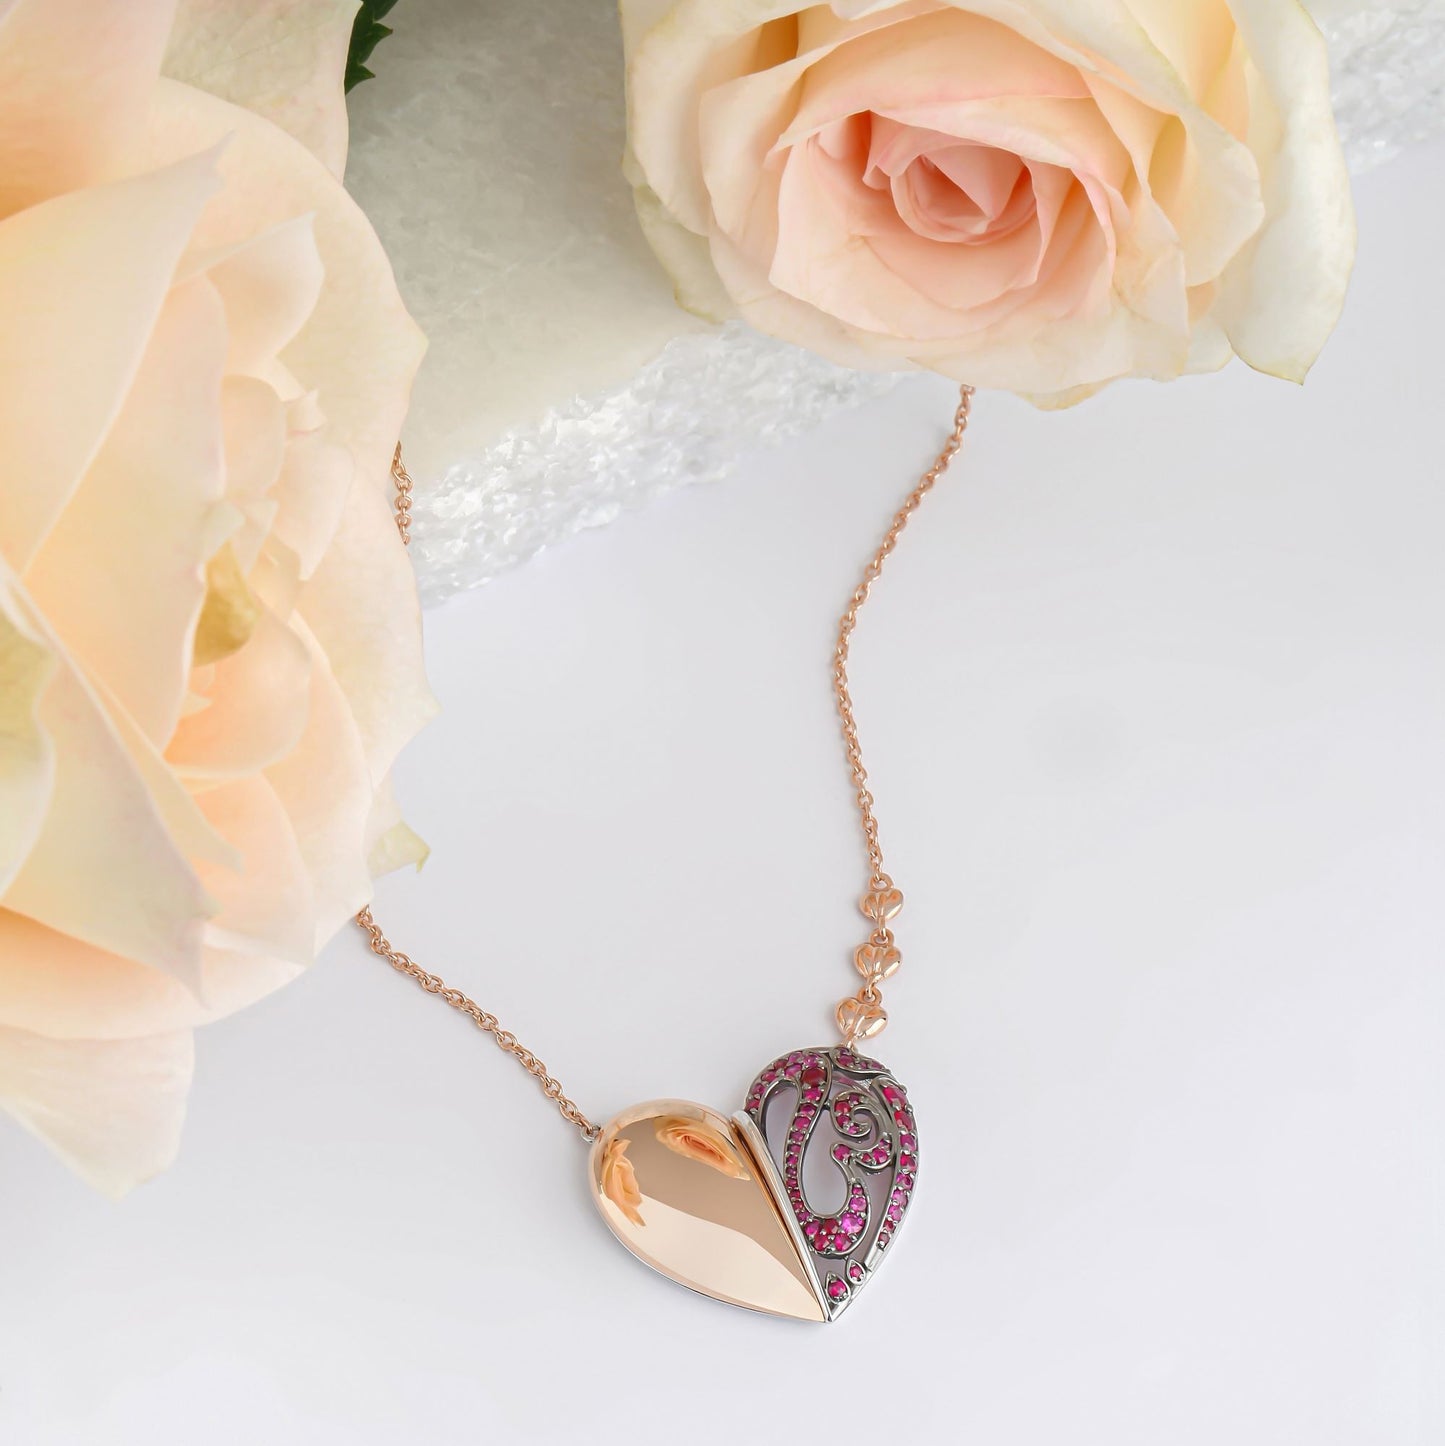 The Mothers' Day Edition - Heart Shaped Custom Arabic Letter "Mother" Rose Gold & Ruby Precious Stones Necklace | Necklaces For Women